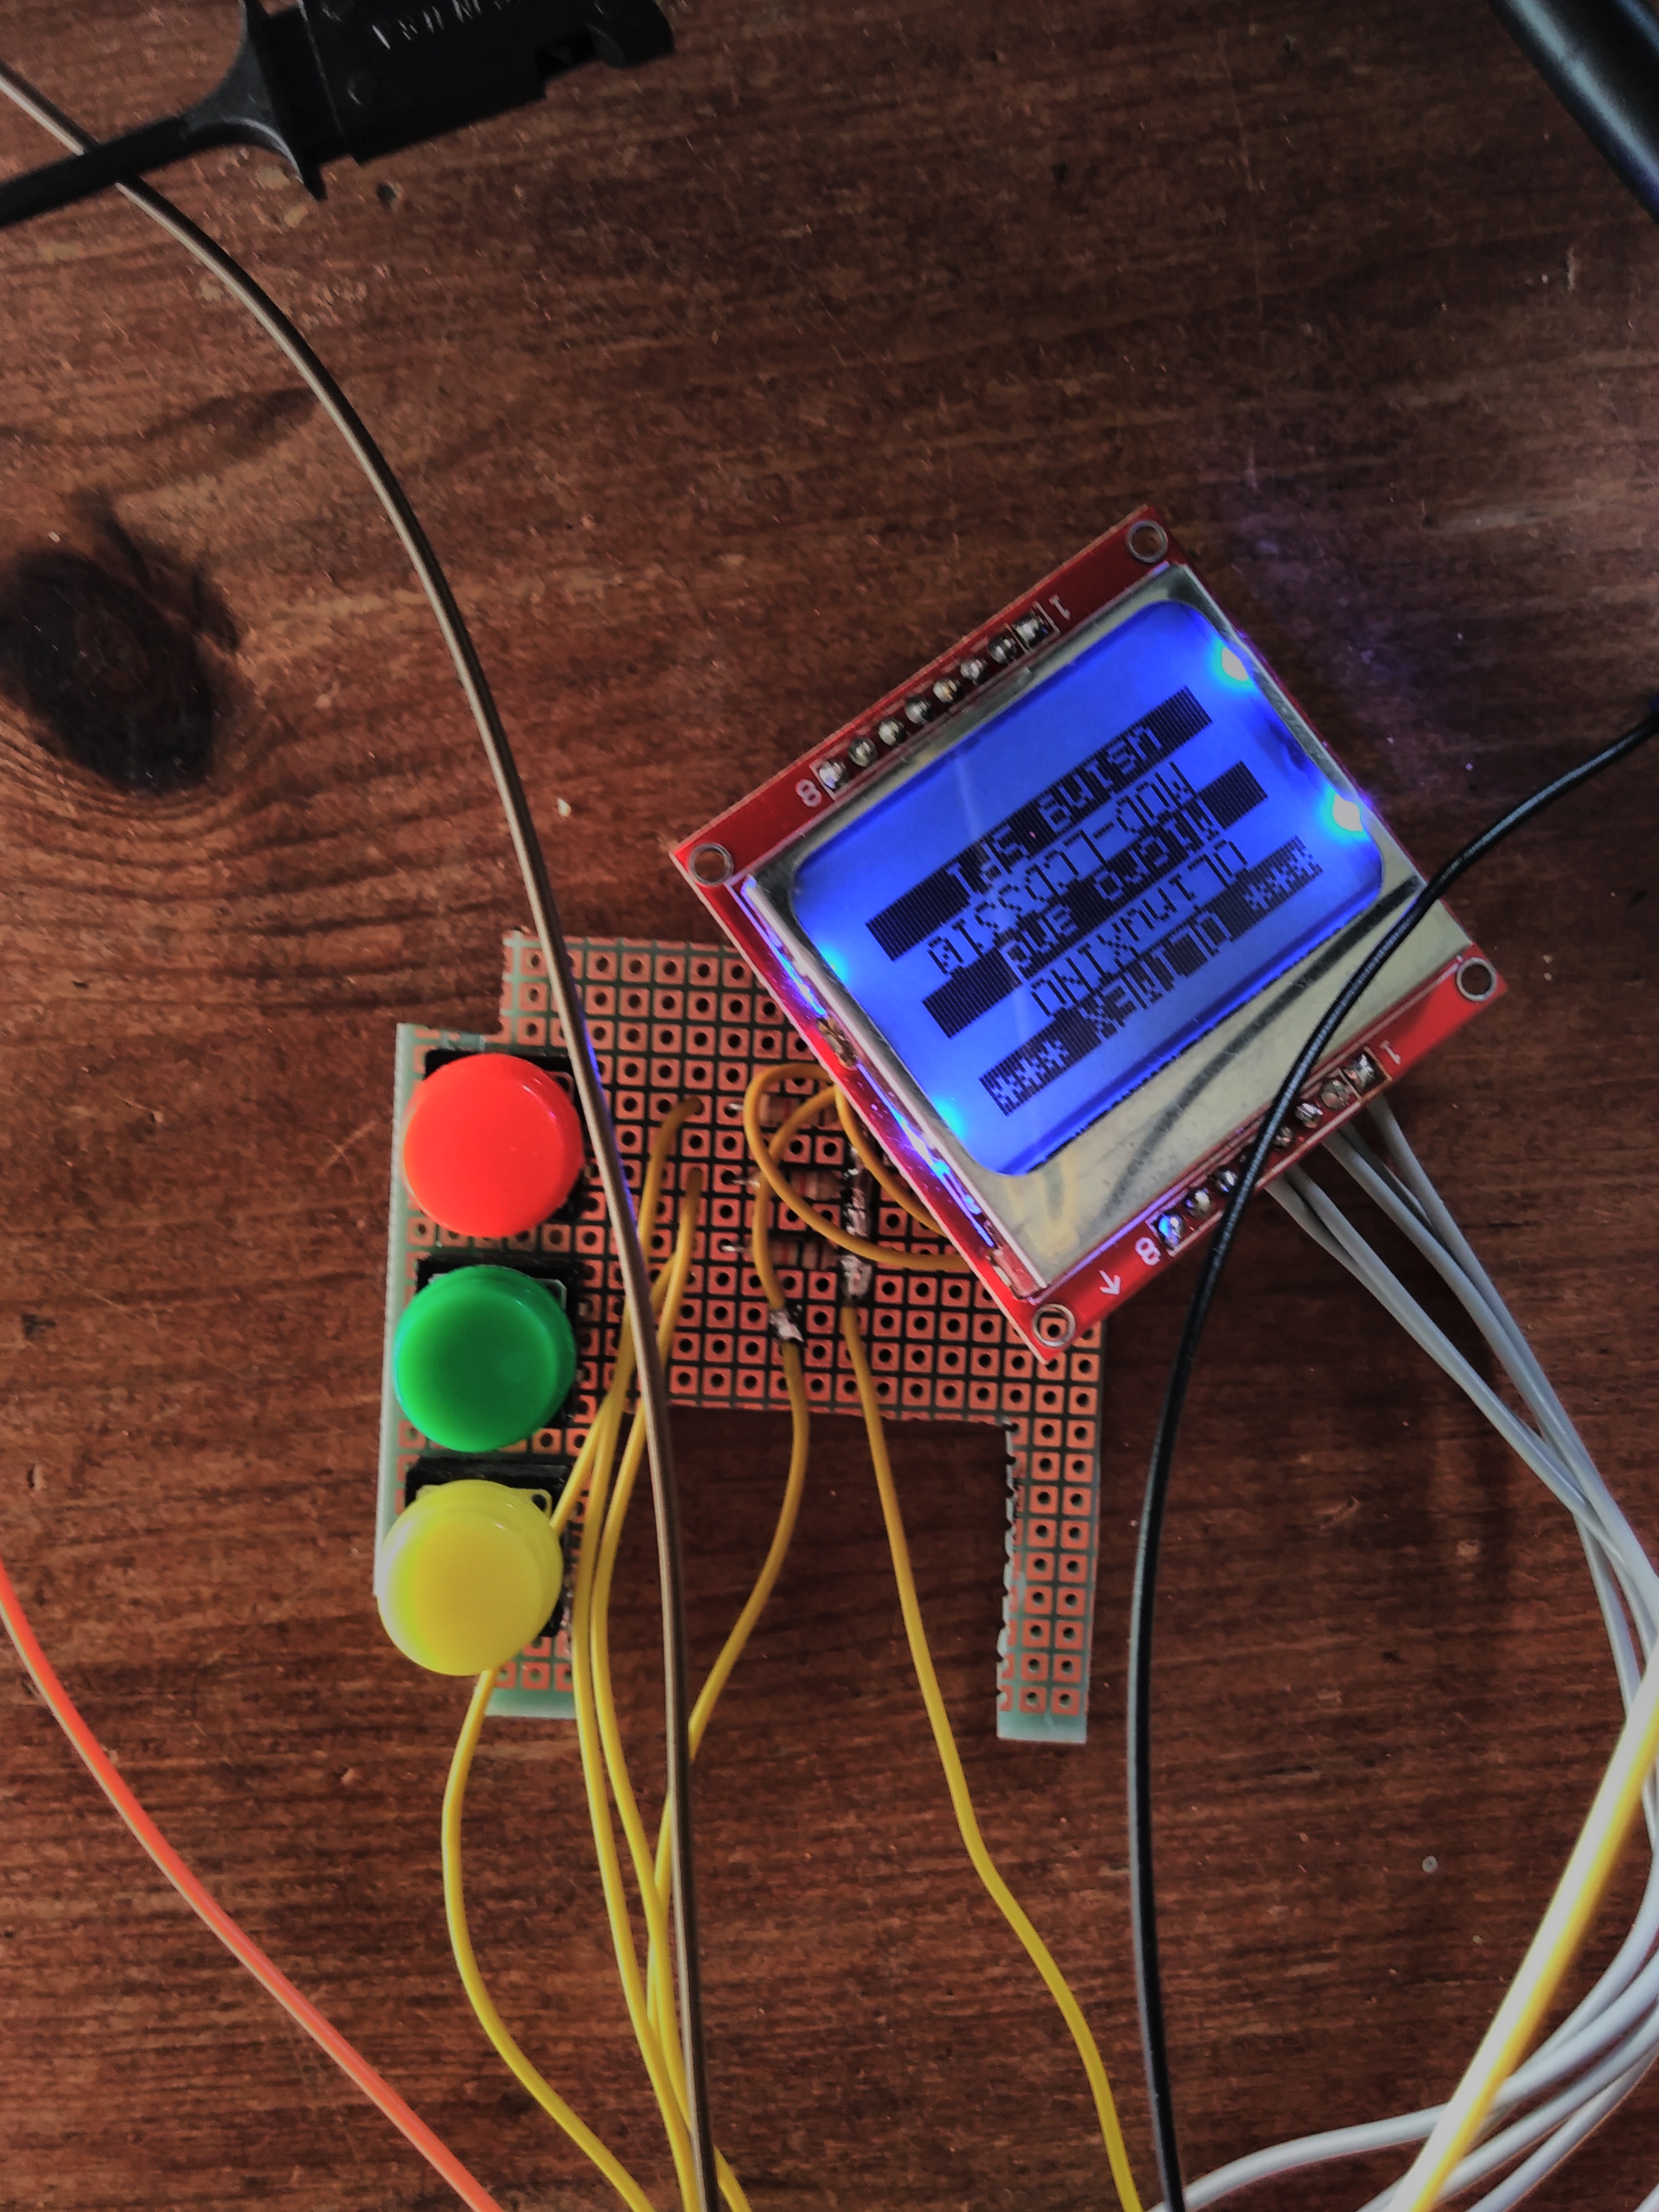 _images/proto_lcd_working_on_lime.jpg